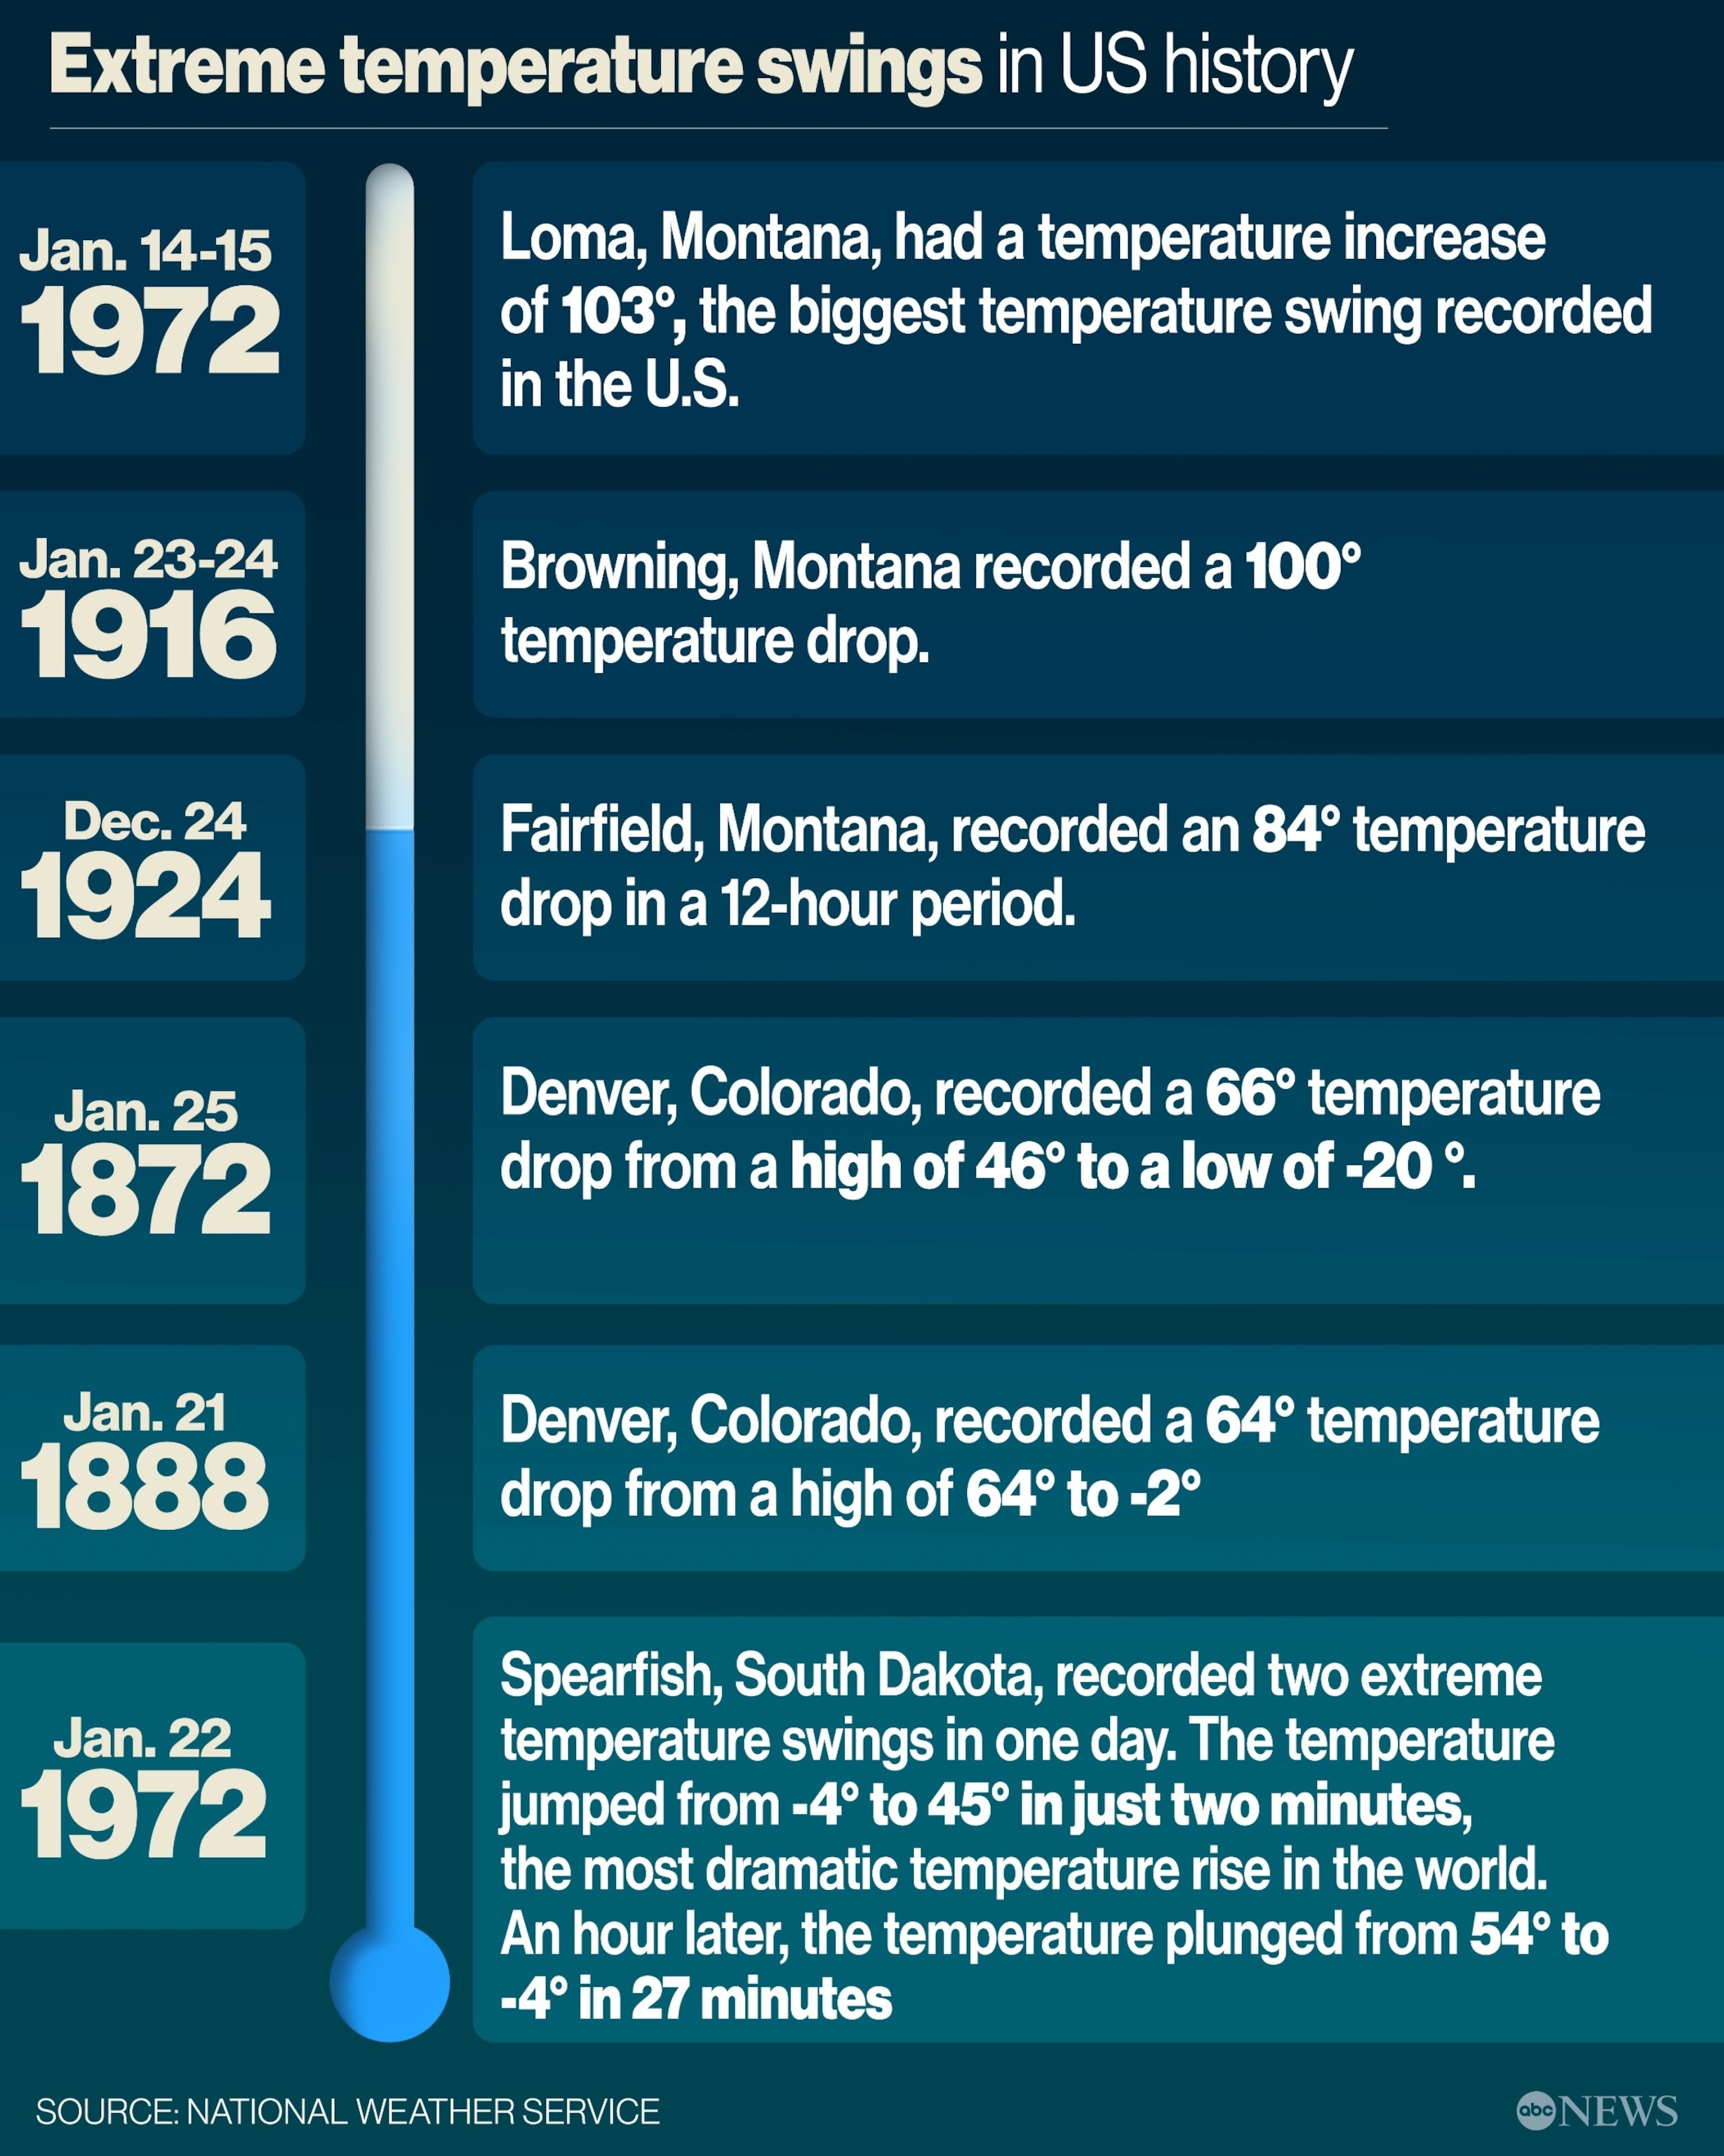 PHOTO: Extreme temperature swings in US history